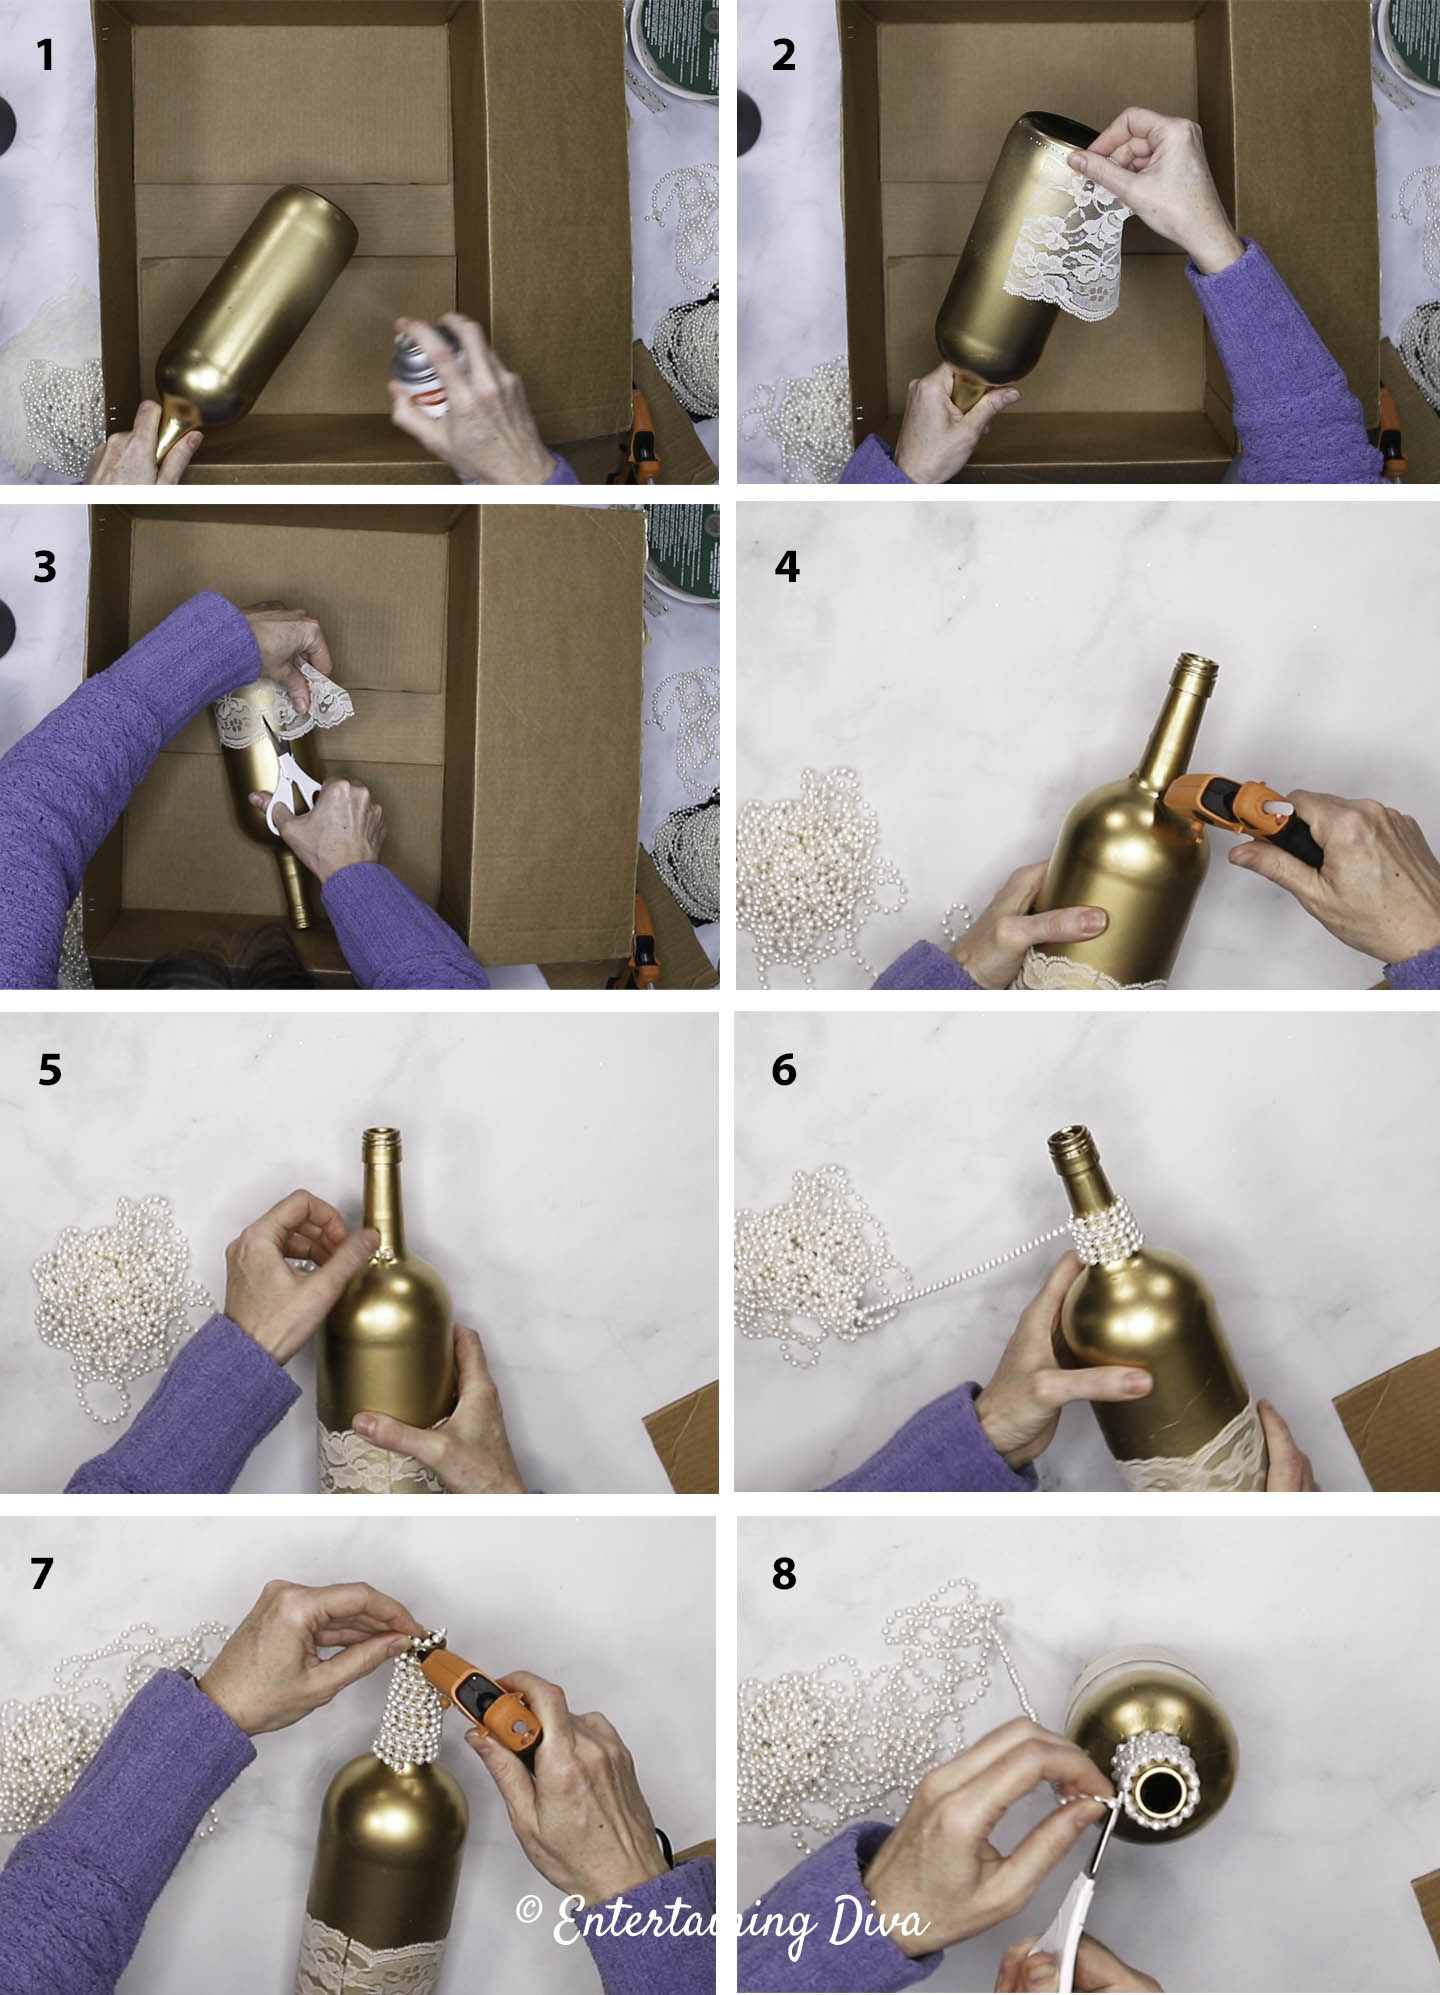 Overview of the steps to decorate a gold wine bottle with white lace and pearls